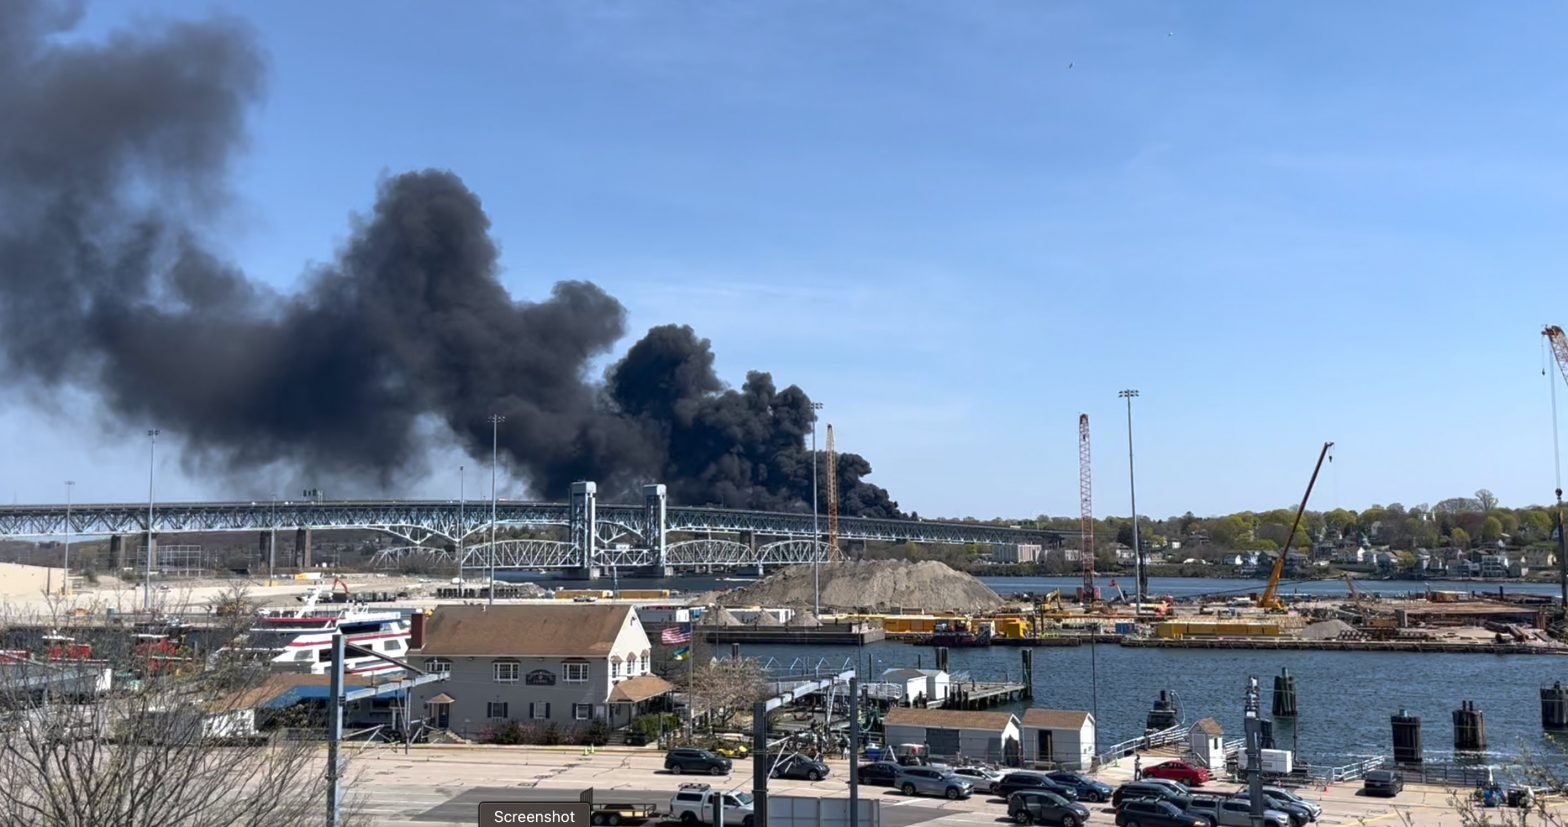 Tanker truck fire on I-95 in Groton, Connecticut halts traffic movement ...